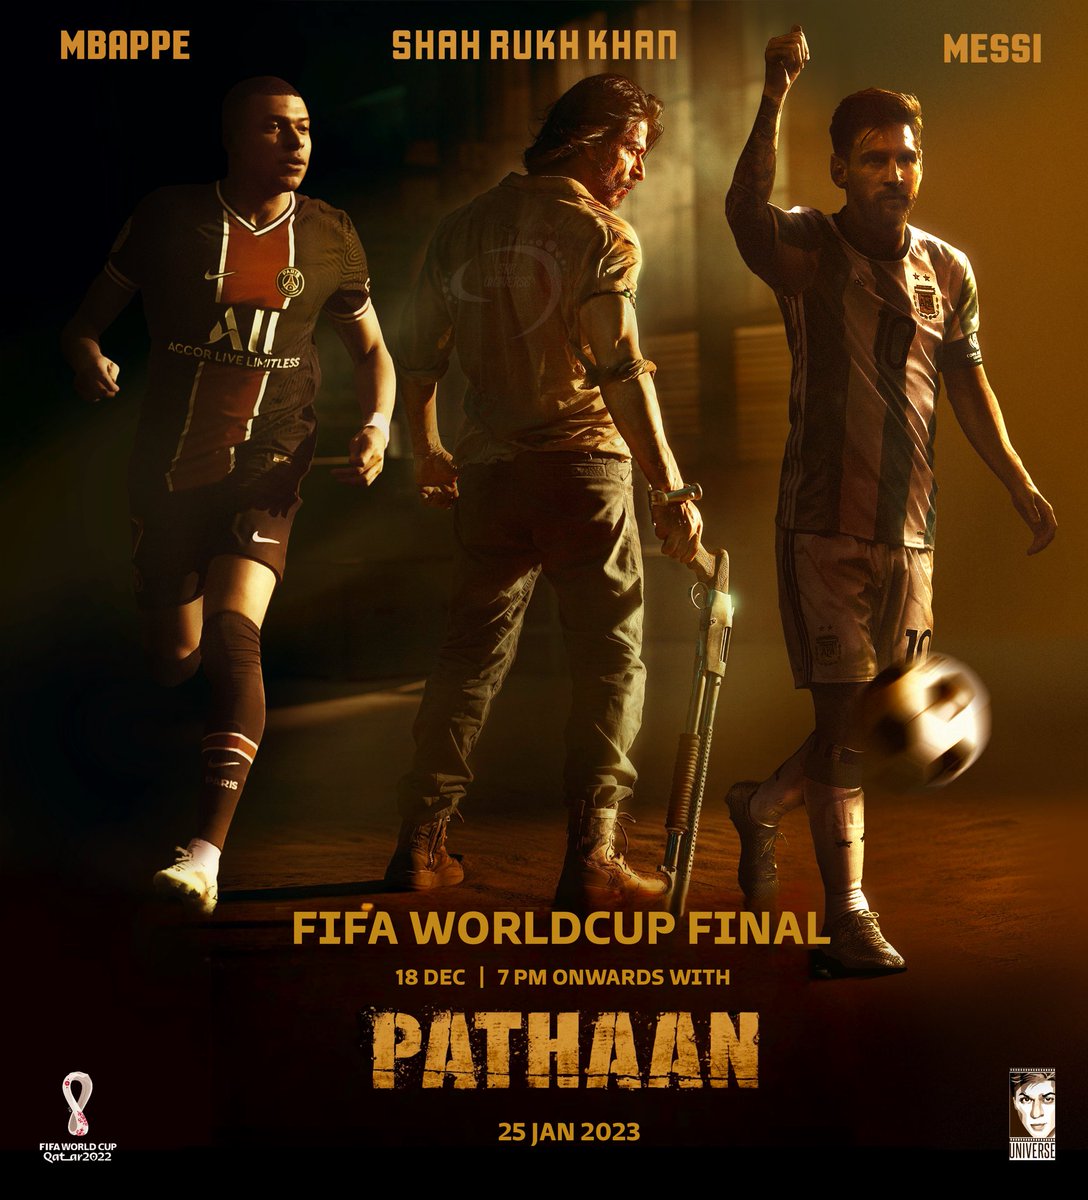 KING KHAN to promote PATHAAN at #FIFAWorldCup2022 #FIFAWorldCup #FIFAWorldCupQatar2022 #WorldCup final #Qatar2022 ! 🔥
Watch him on 18th Dec at the FIFA World Cup FINALS at Match Centre ♥️🔥
#ARGCRO #Messi #Mbappe #football #ShahRukhKhan #BesharamRang #Pathaan #Arg #FRA #France